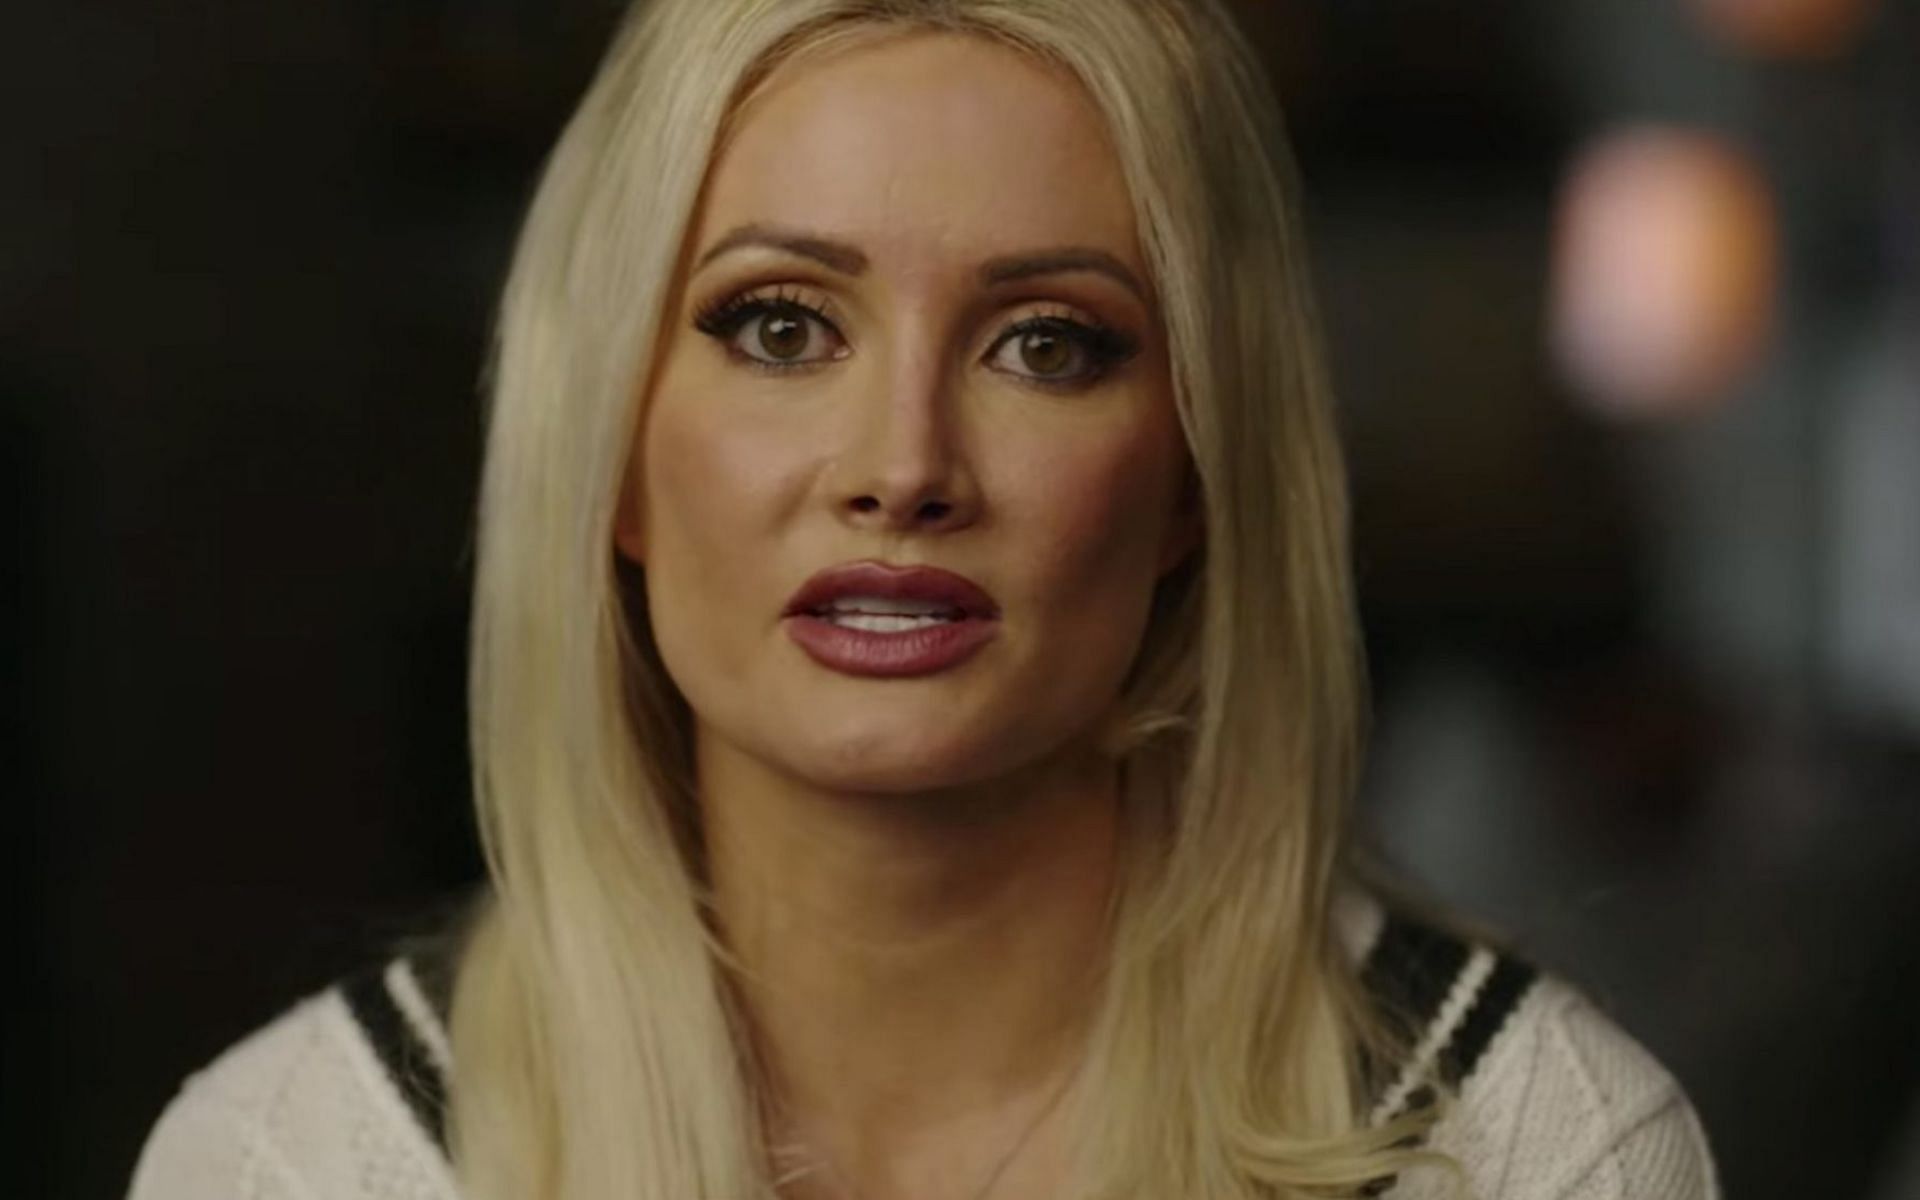 Holly Madison has made some revelatory statements on the docuseries (Image via People)